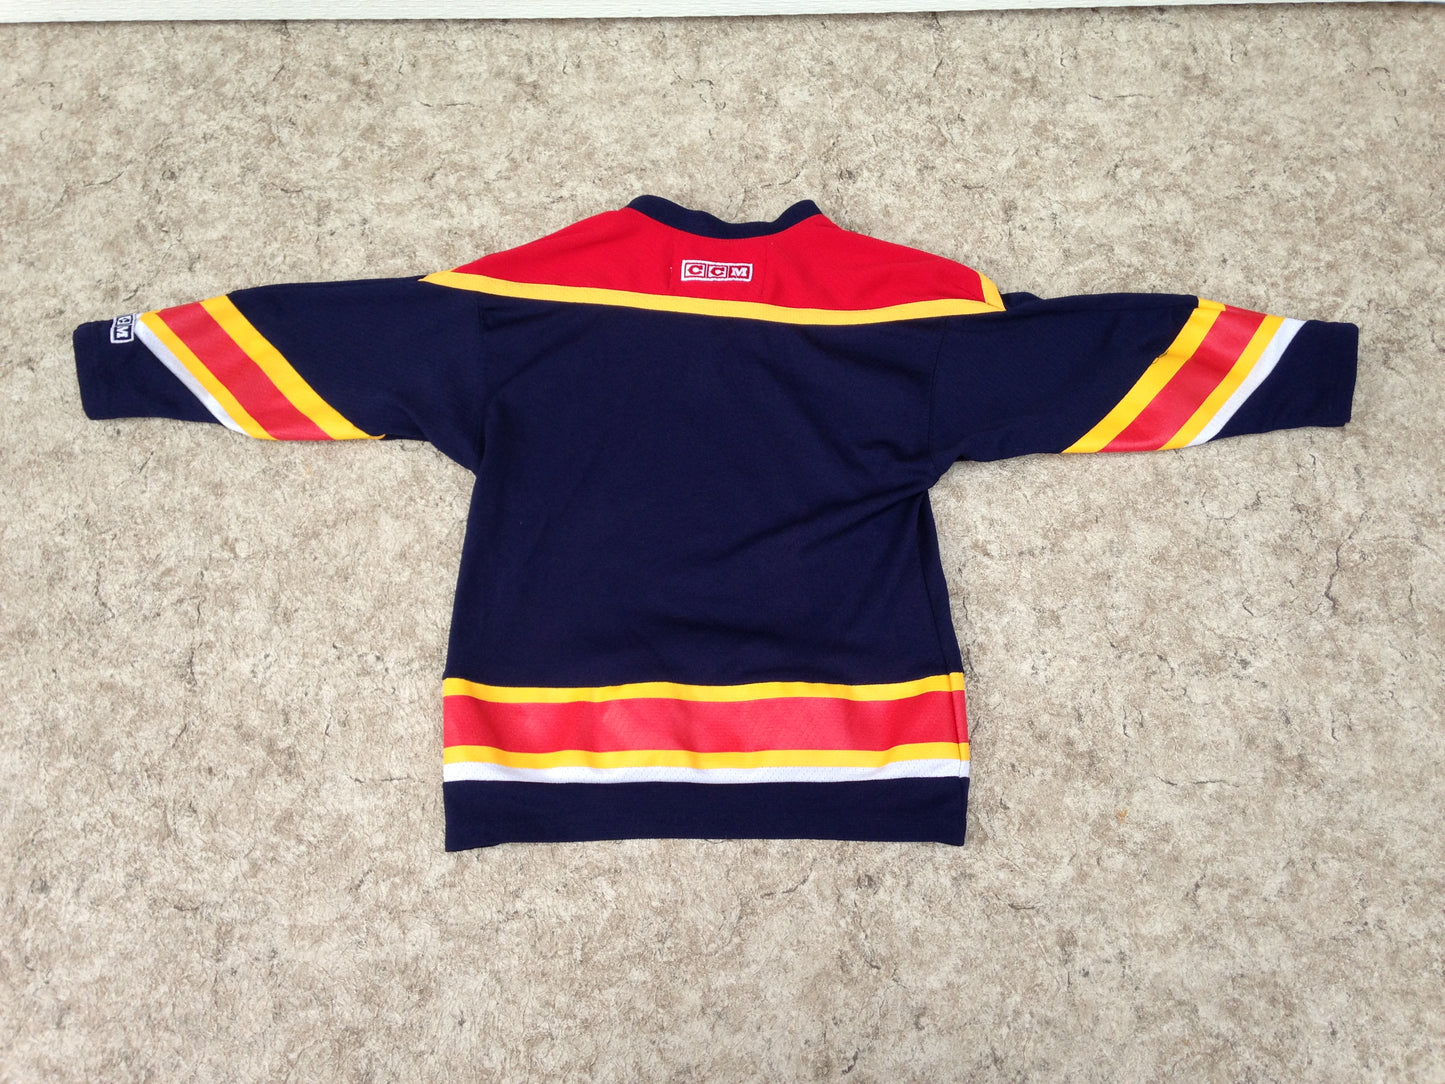 Hockey Jersey Child Size 4-7 Florida Panthers Excellent